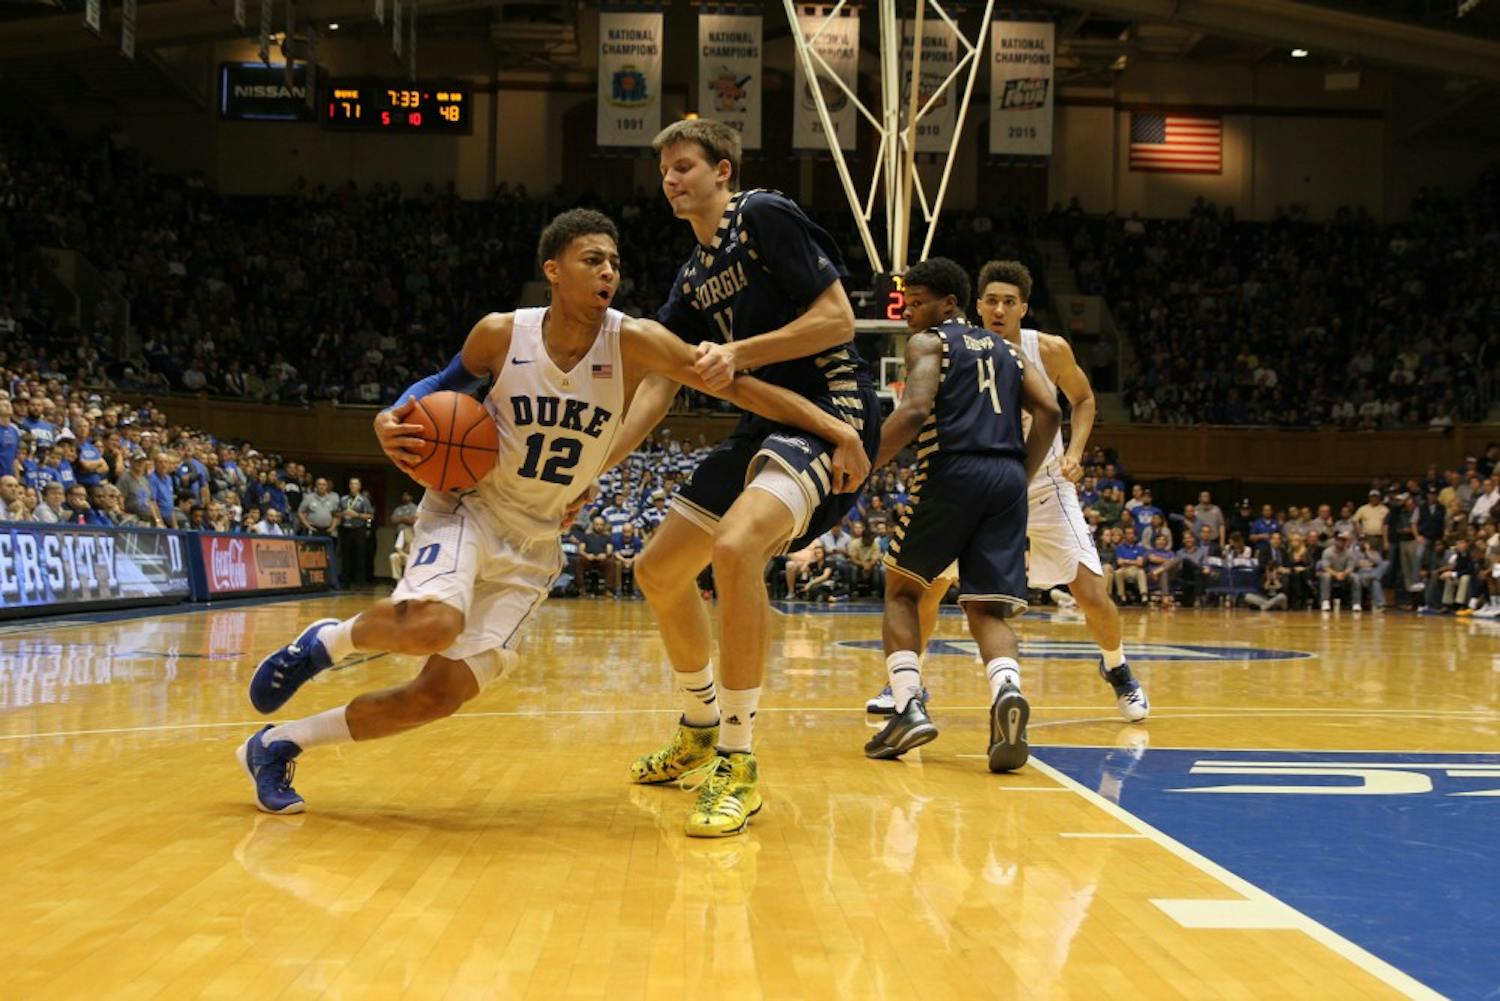 Freshman Derryck Thornton did most of his damage late but finished with 15 points and three triples.